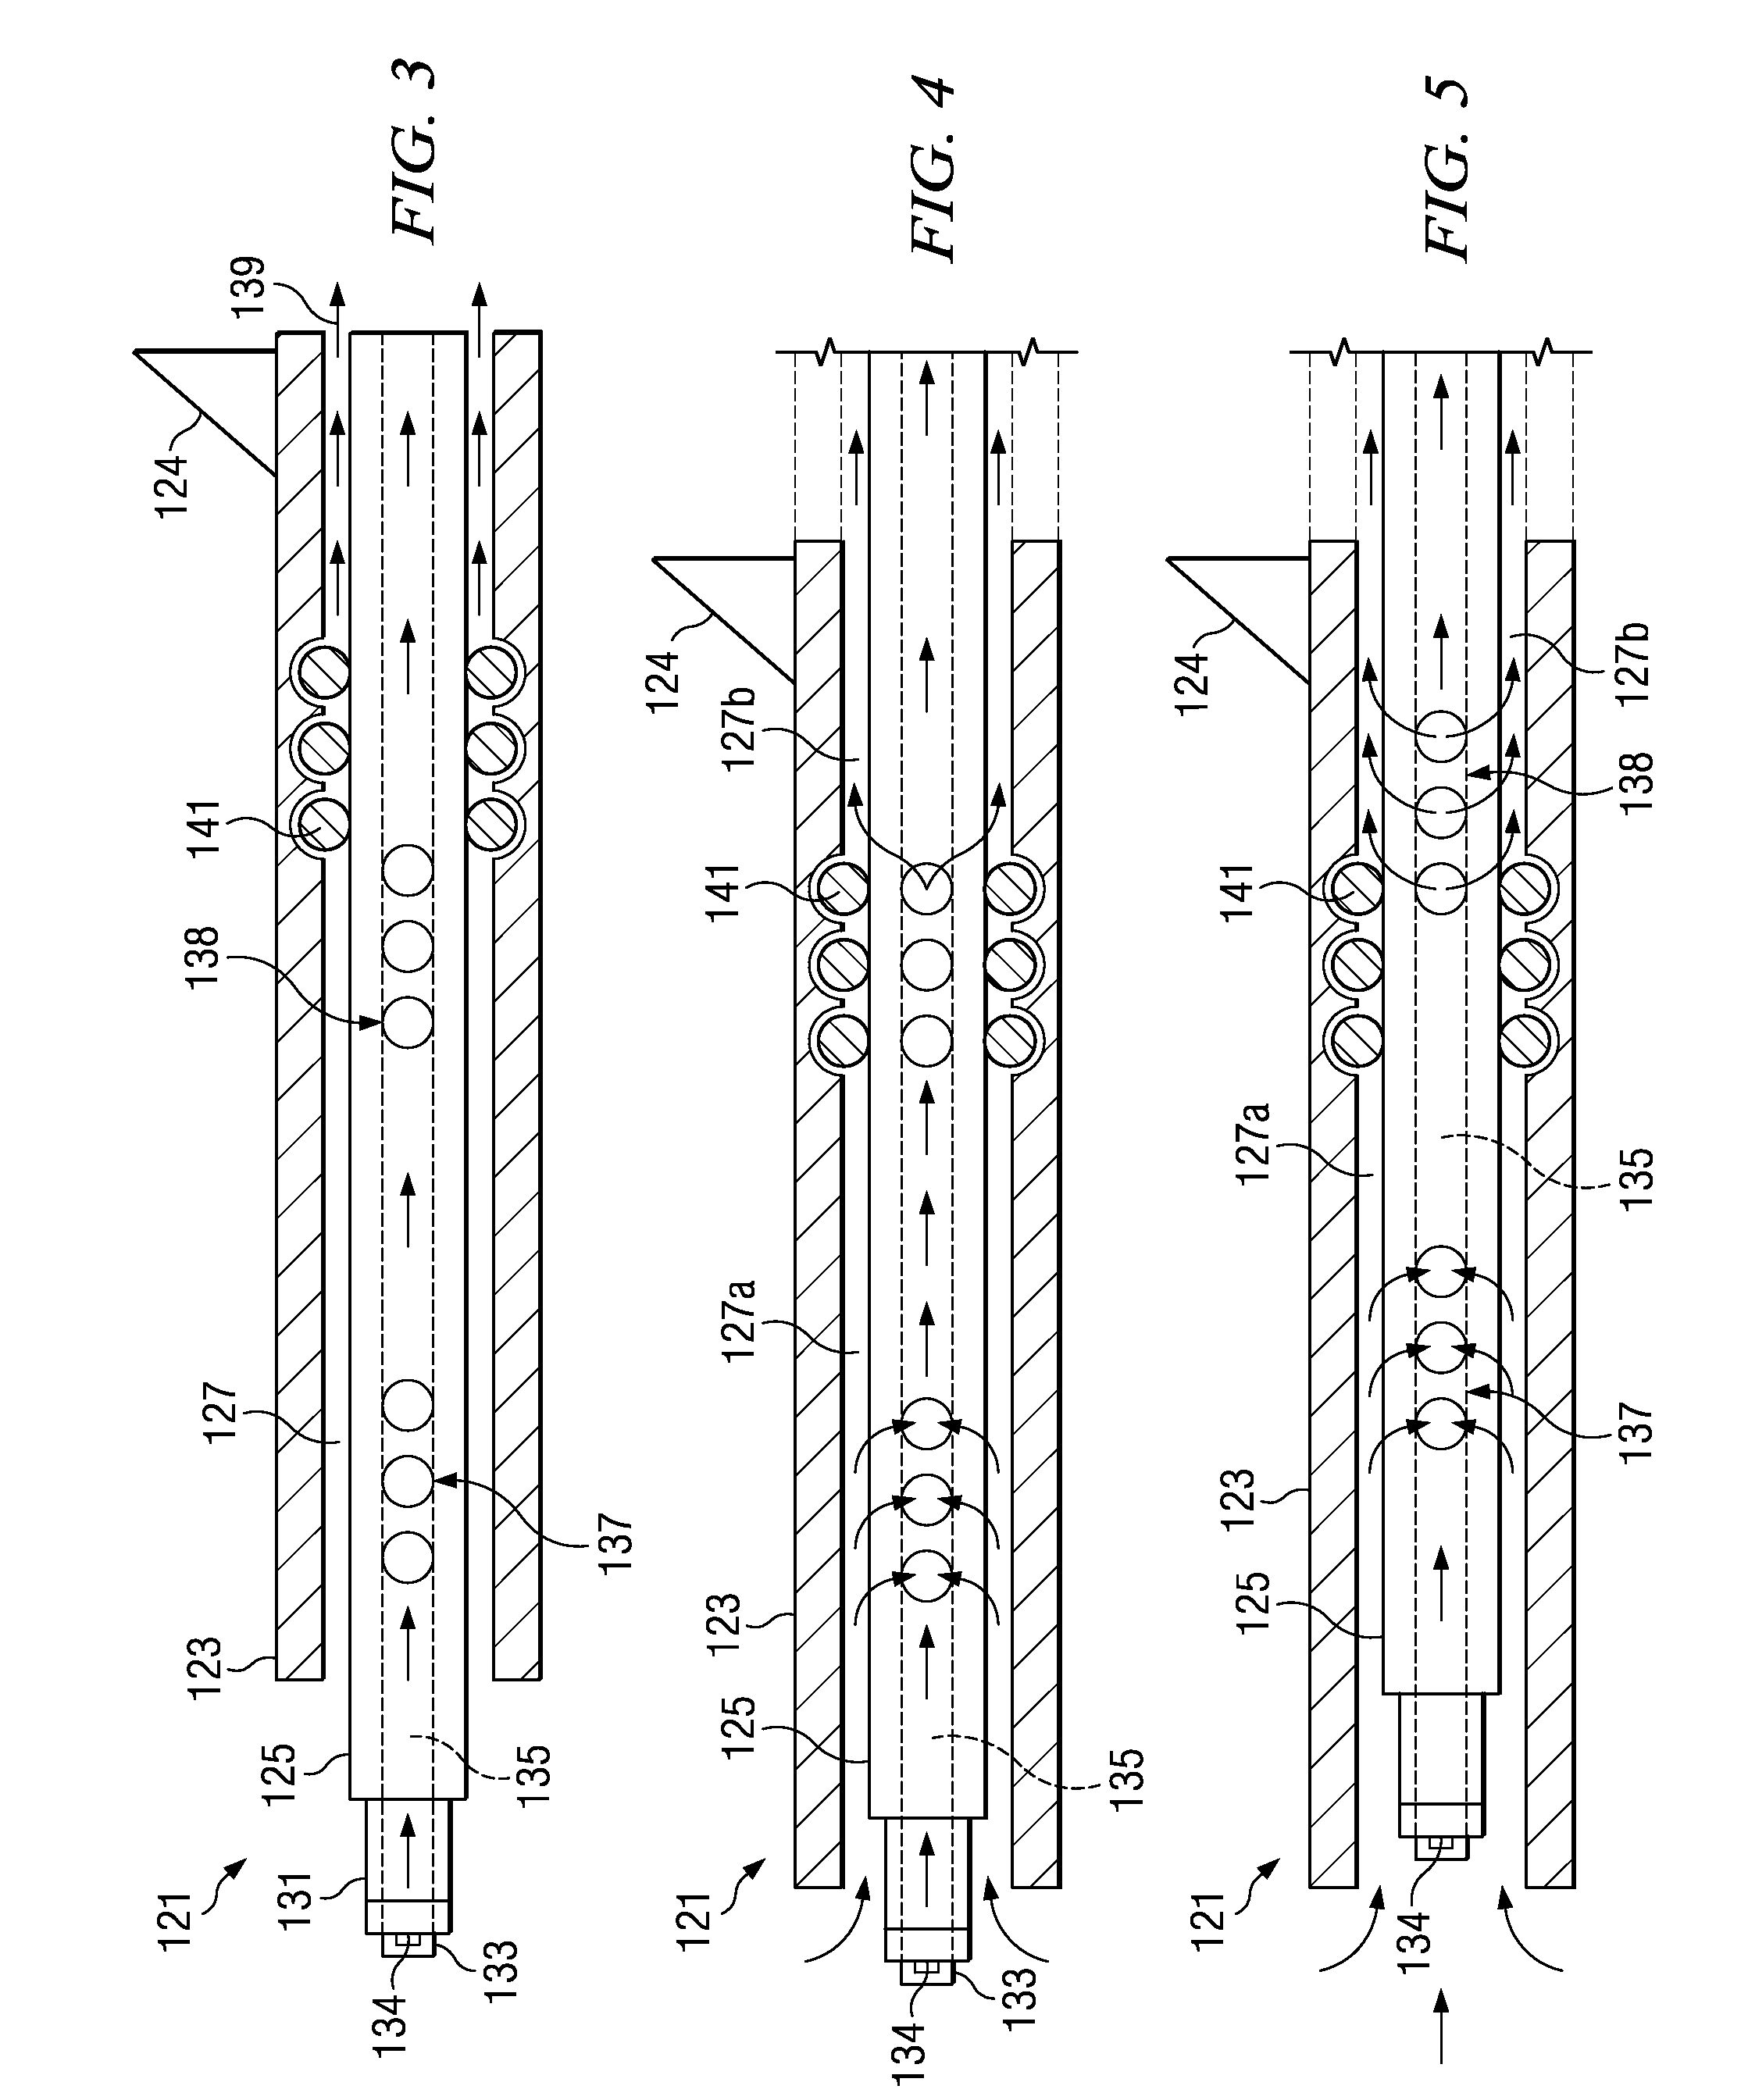 System, method and apparatus for electrosurgical instrument with movable suction sheath